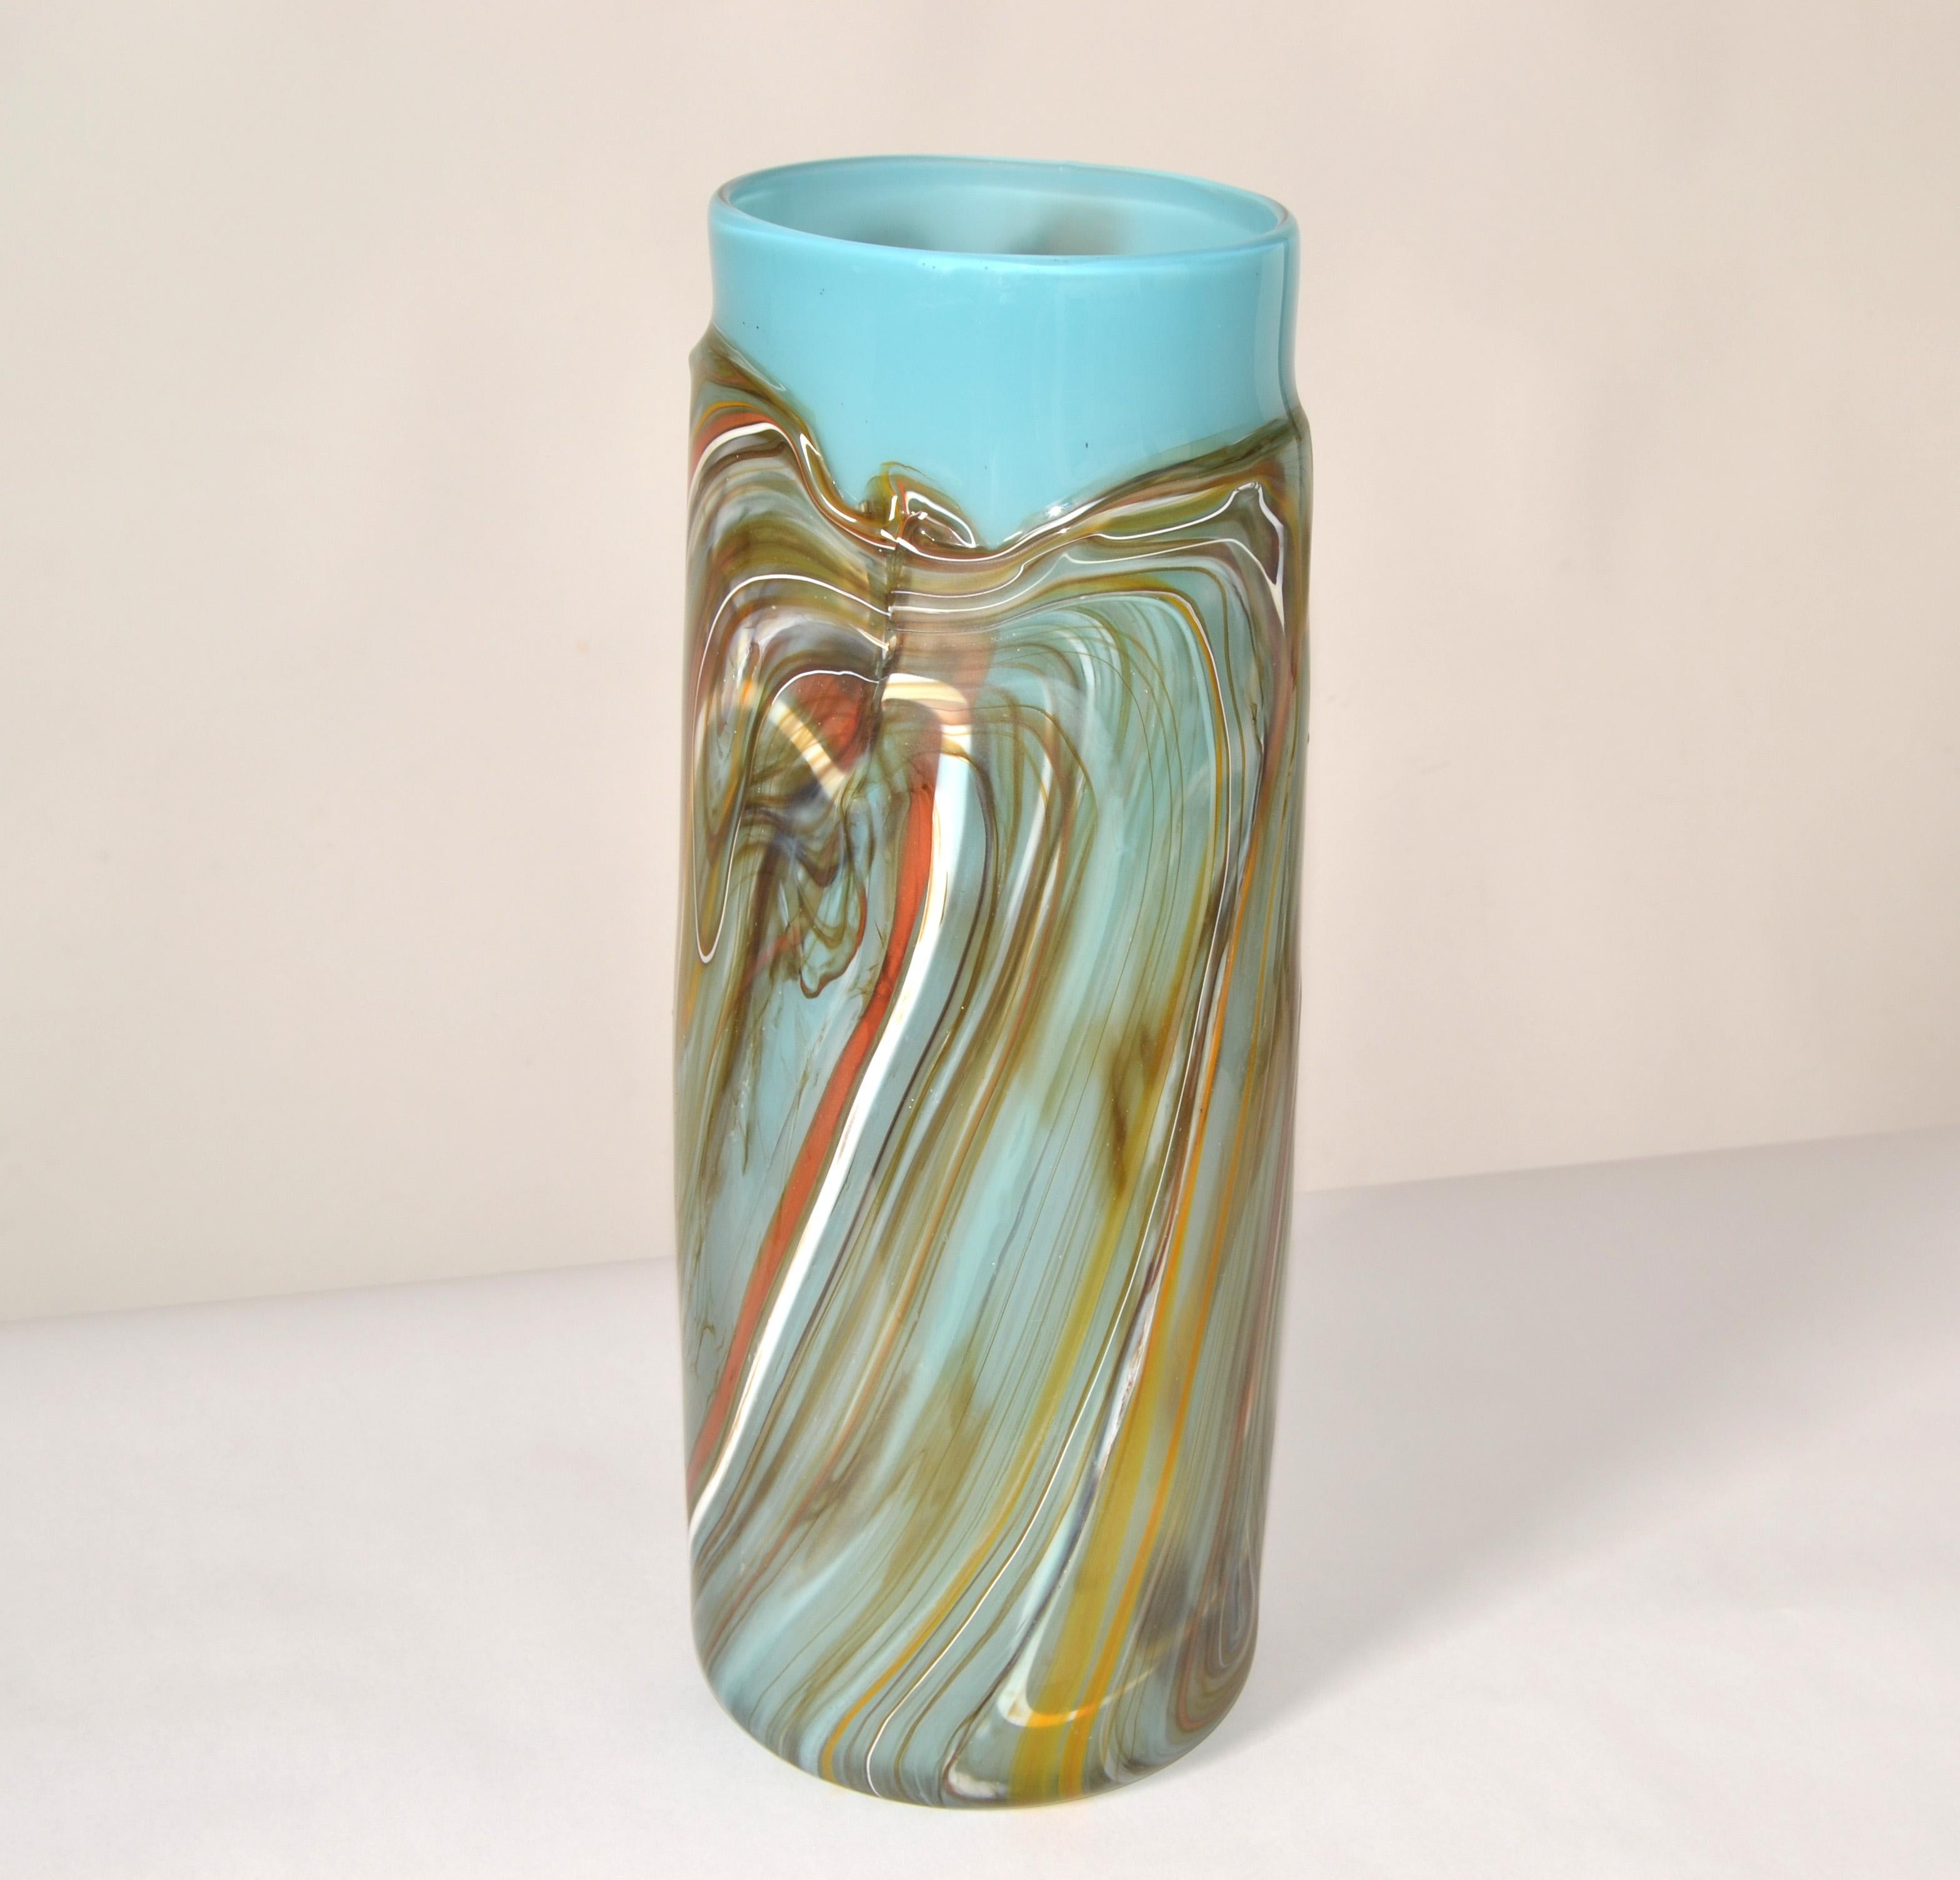 American Vintage Studio Art Blown Glass Heavy Vase Vessel Turquoise and Hues Brown 1975 For Sale